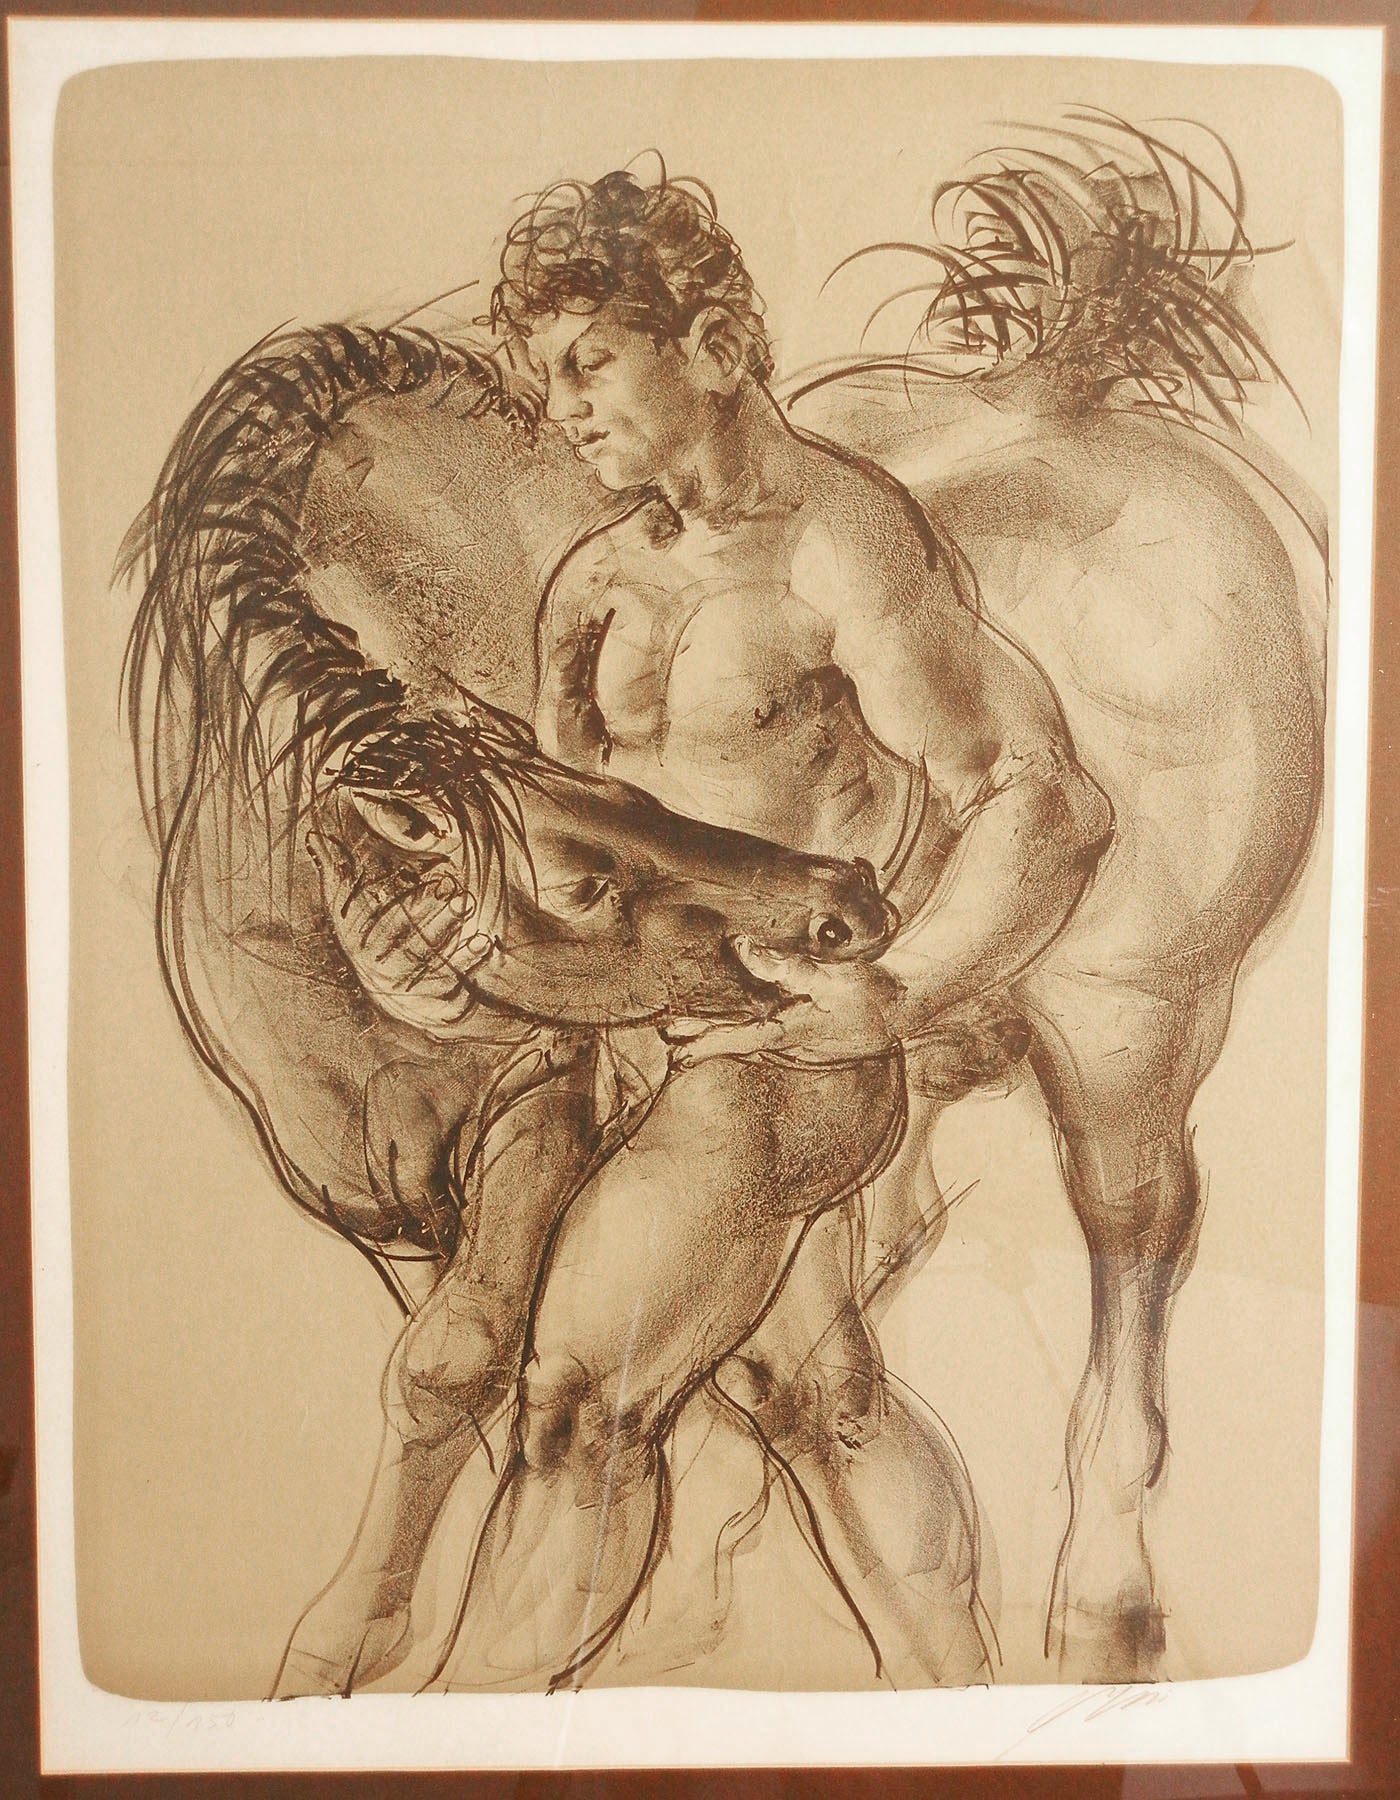 "Nude Youth with Horse, " Early, Rare Print by Hans Erni